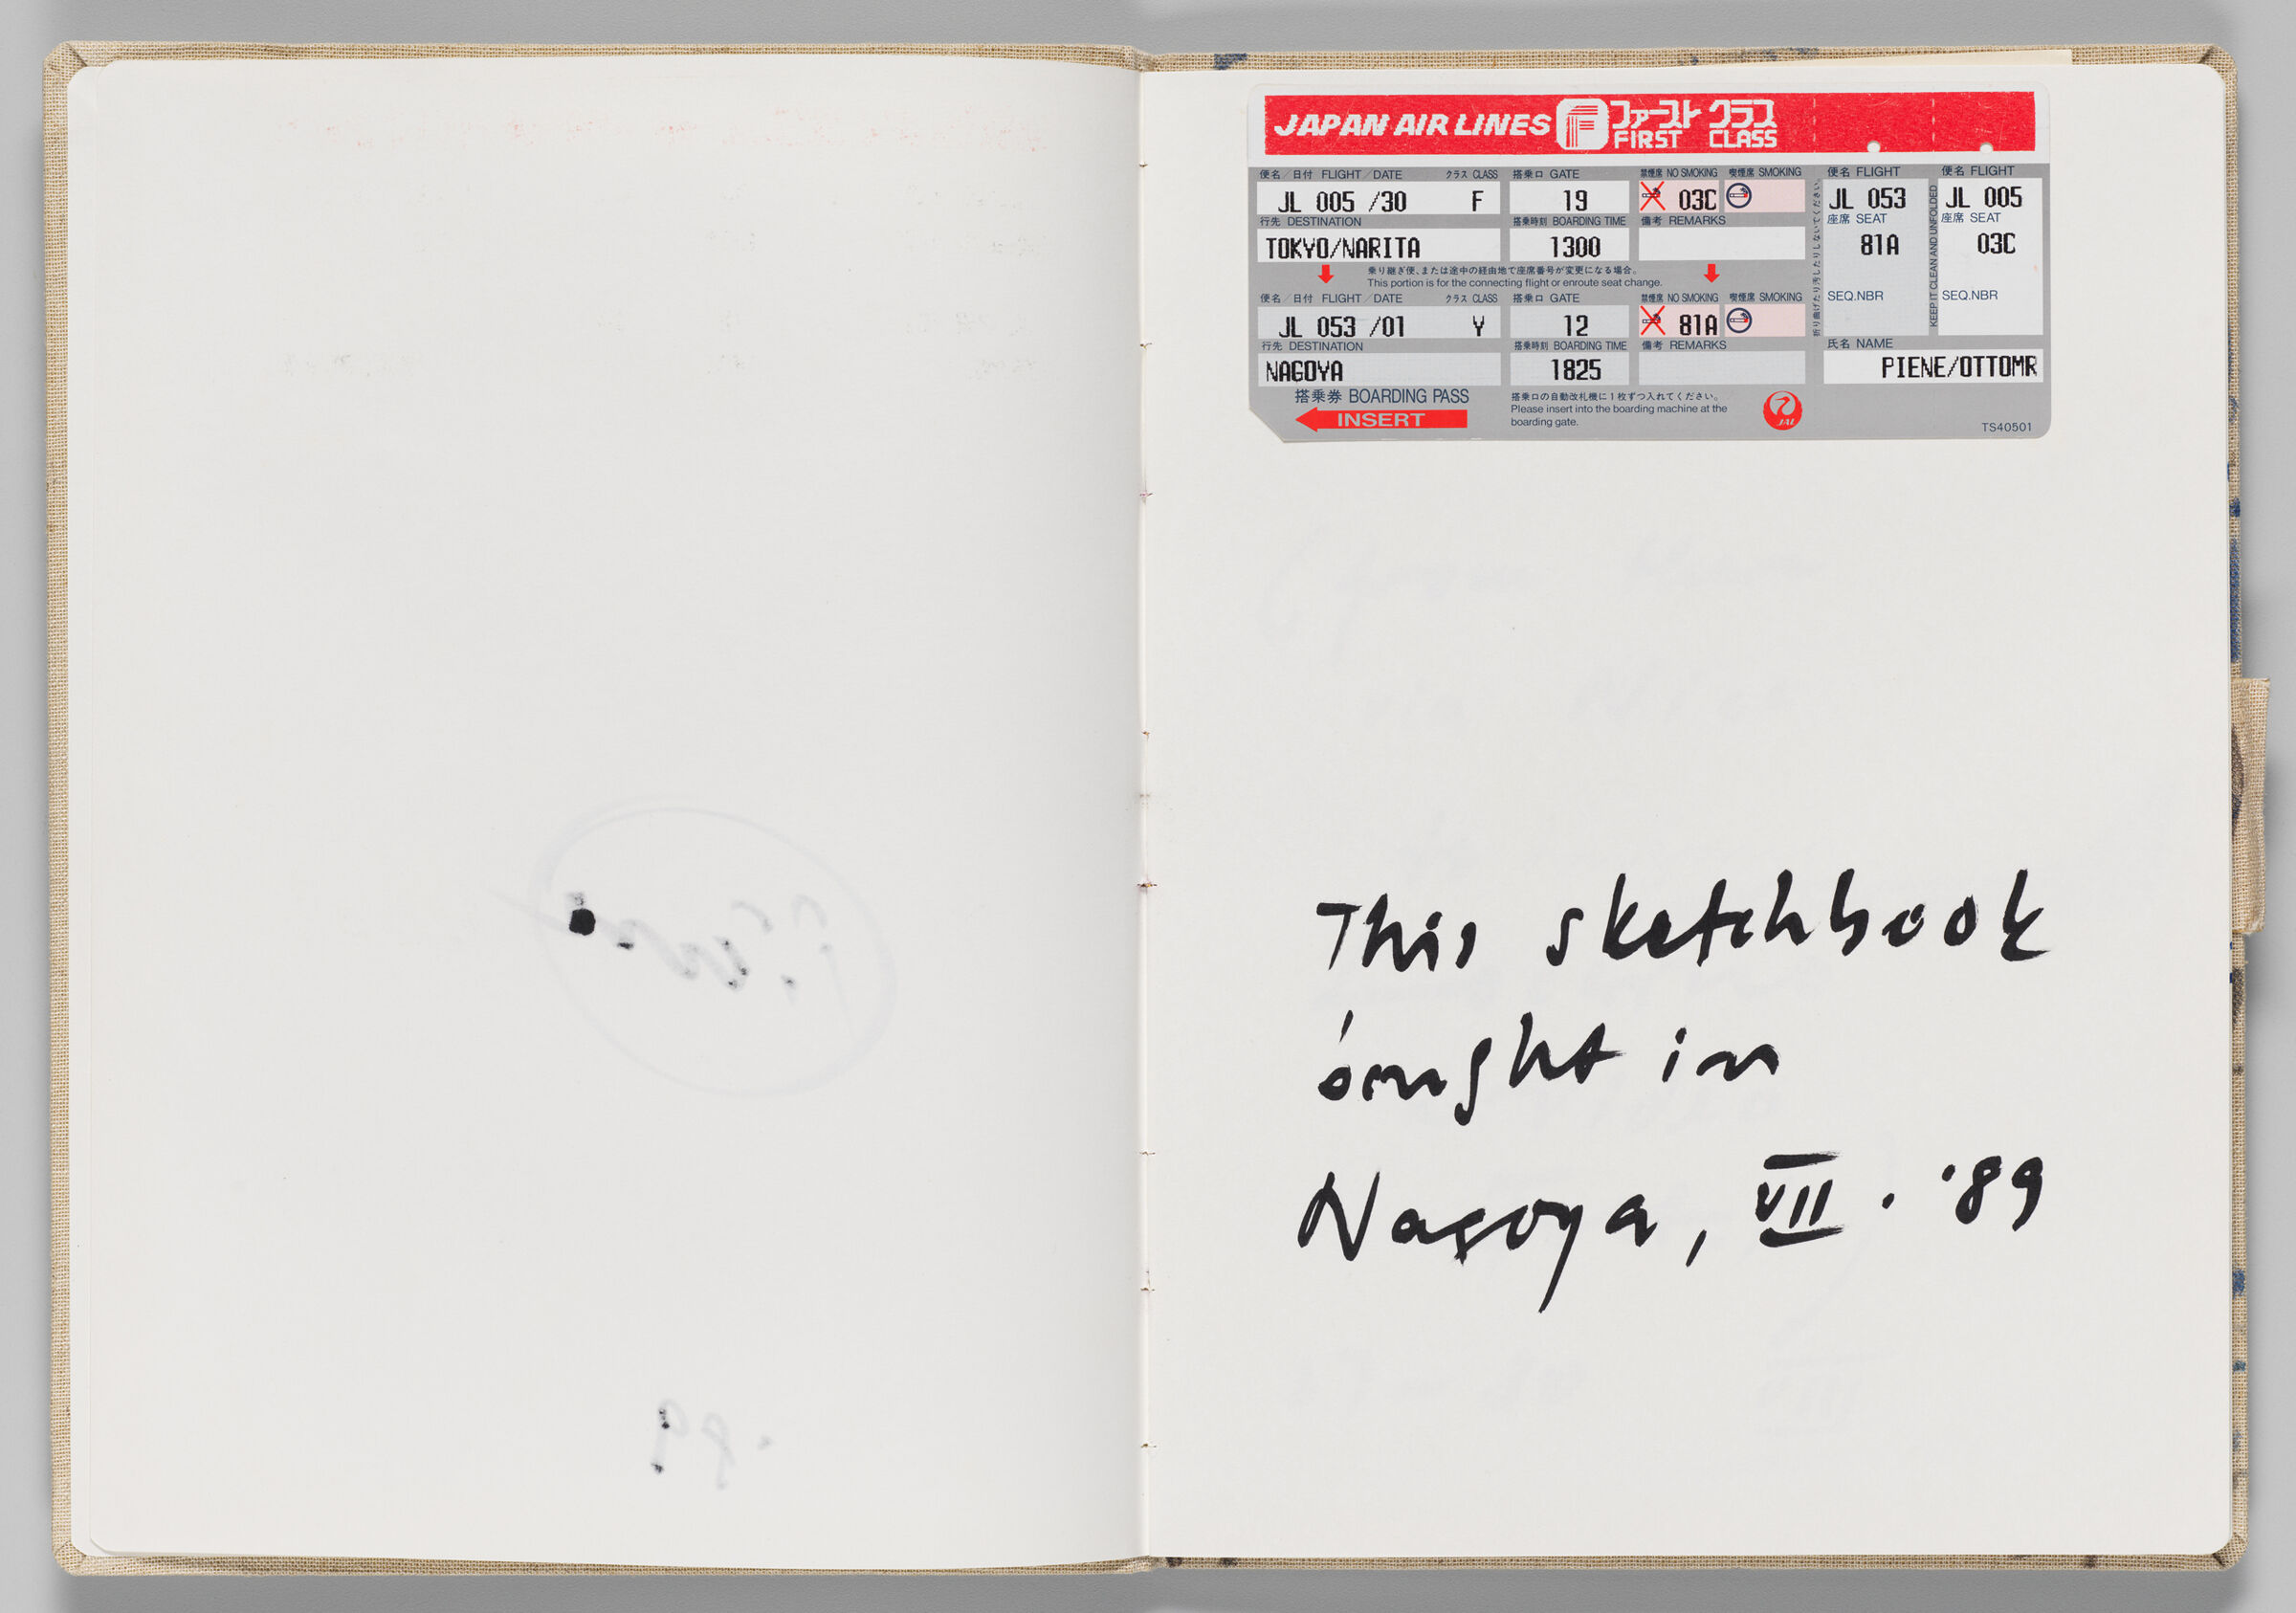 Untitled (Bleed-Through Of Previous Page, Left Page); Untitled (Note And Adhered First Class Japan Air Lines Boarding Pass, Right Page)